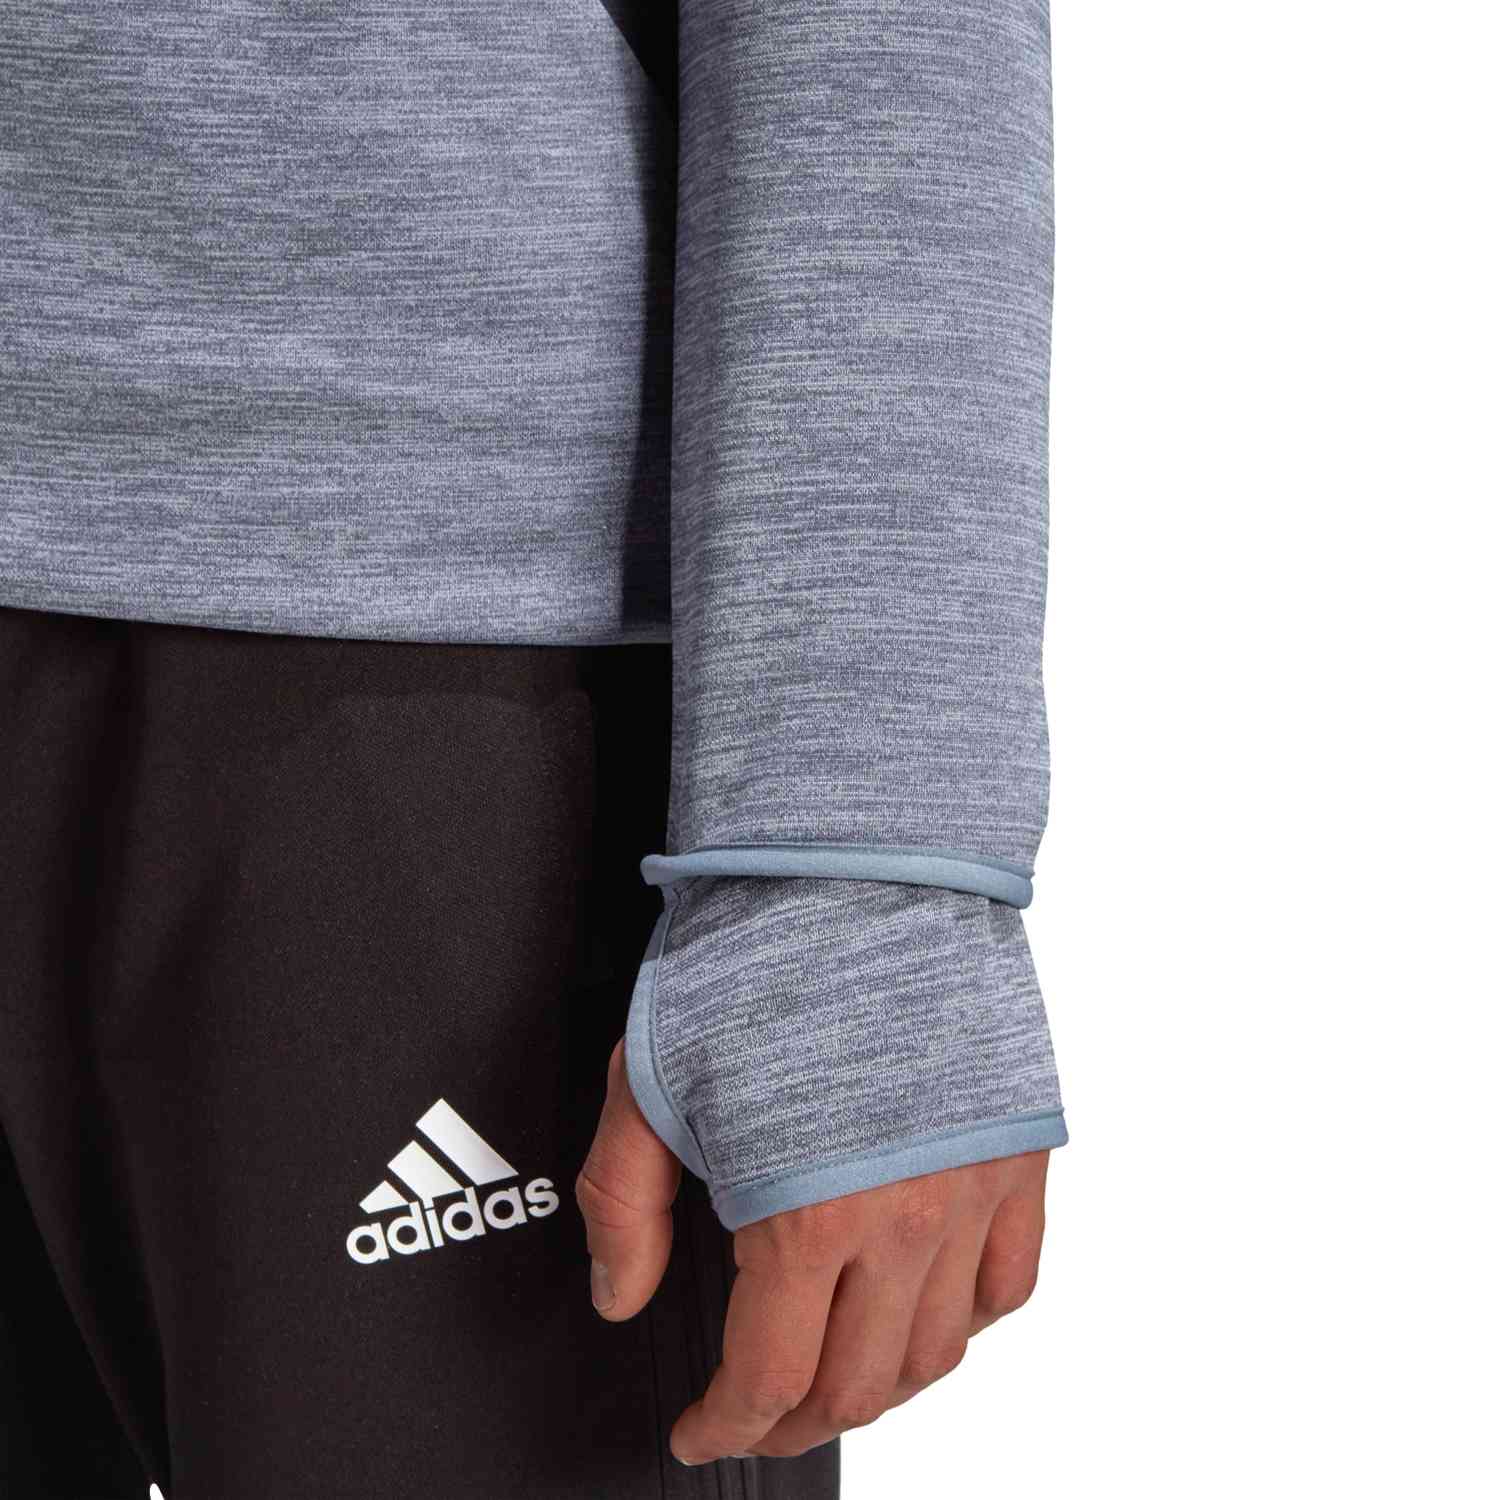 adidas Z.N.E. Hoodie Updates - SoccerBible